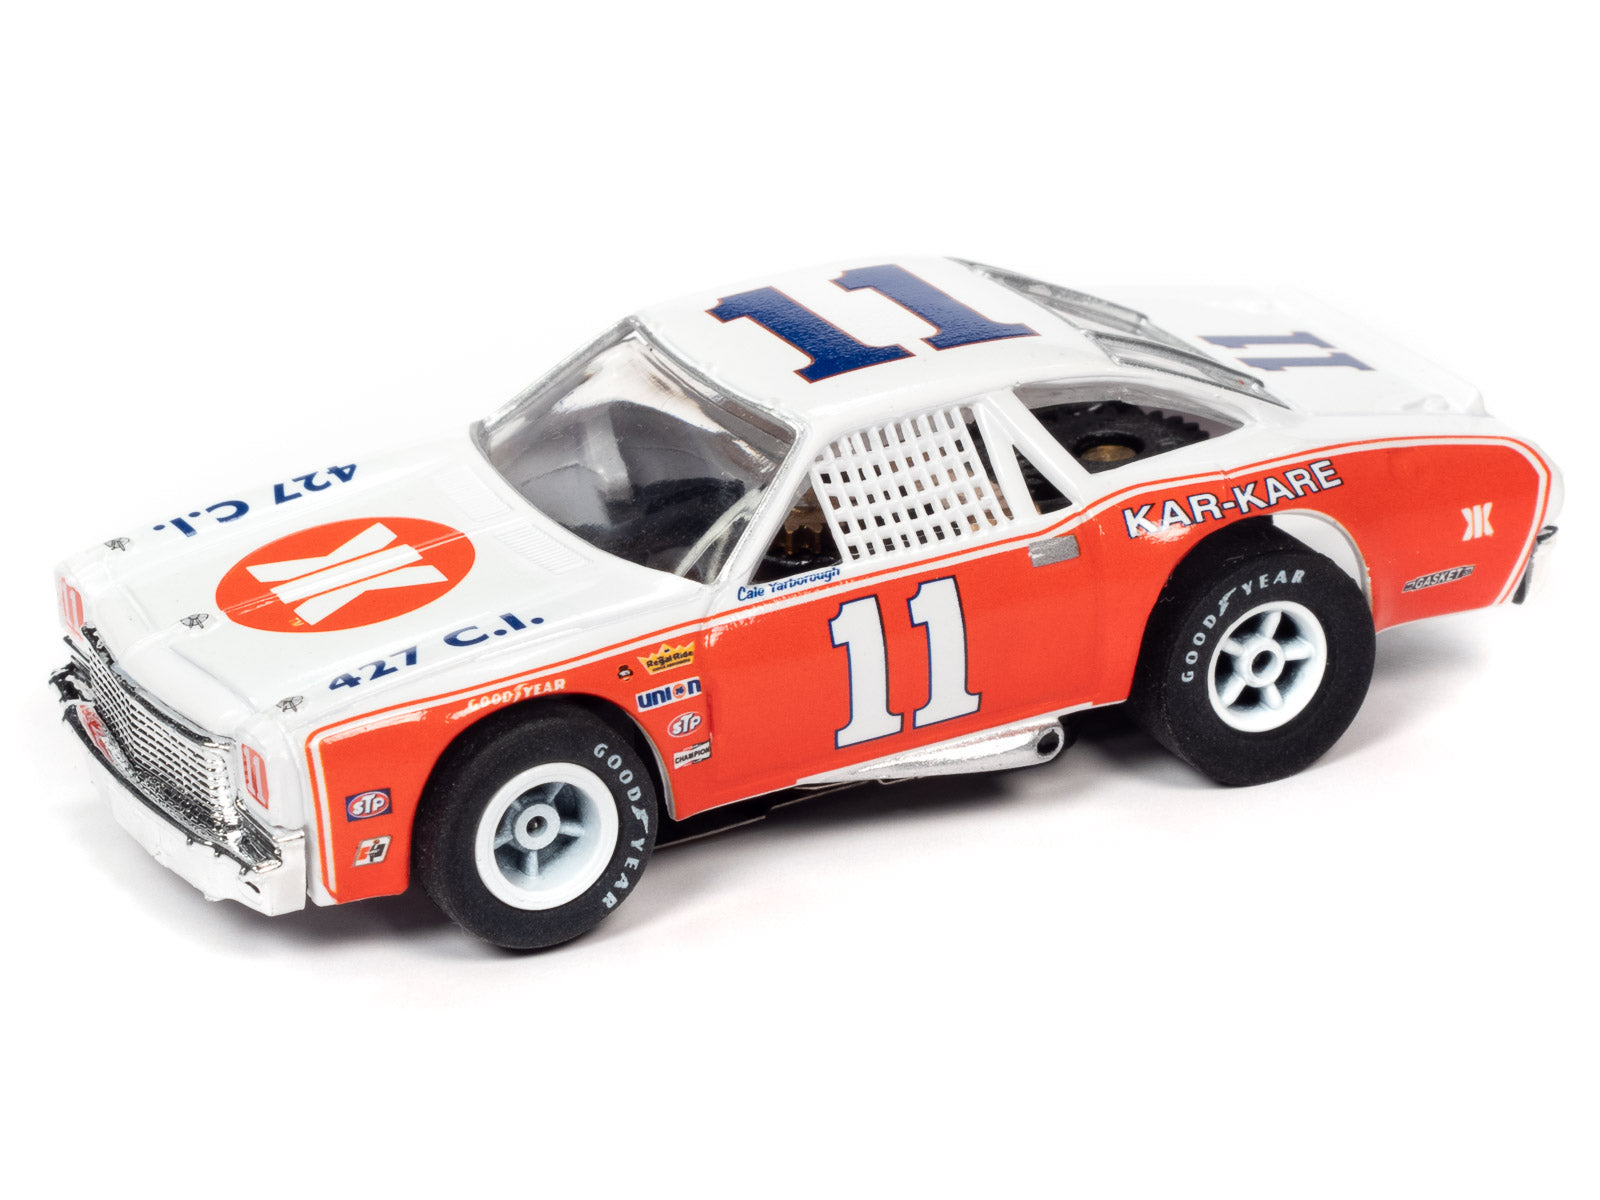 1973 Royalty Industries Dog in #57 Race Car Bank – The Toys Time